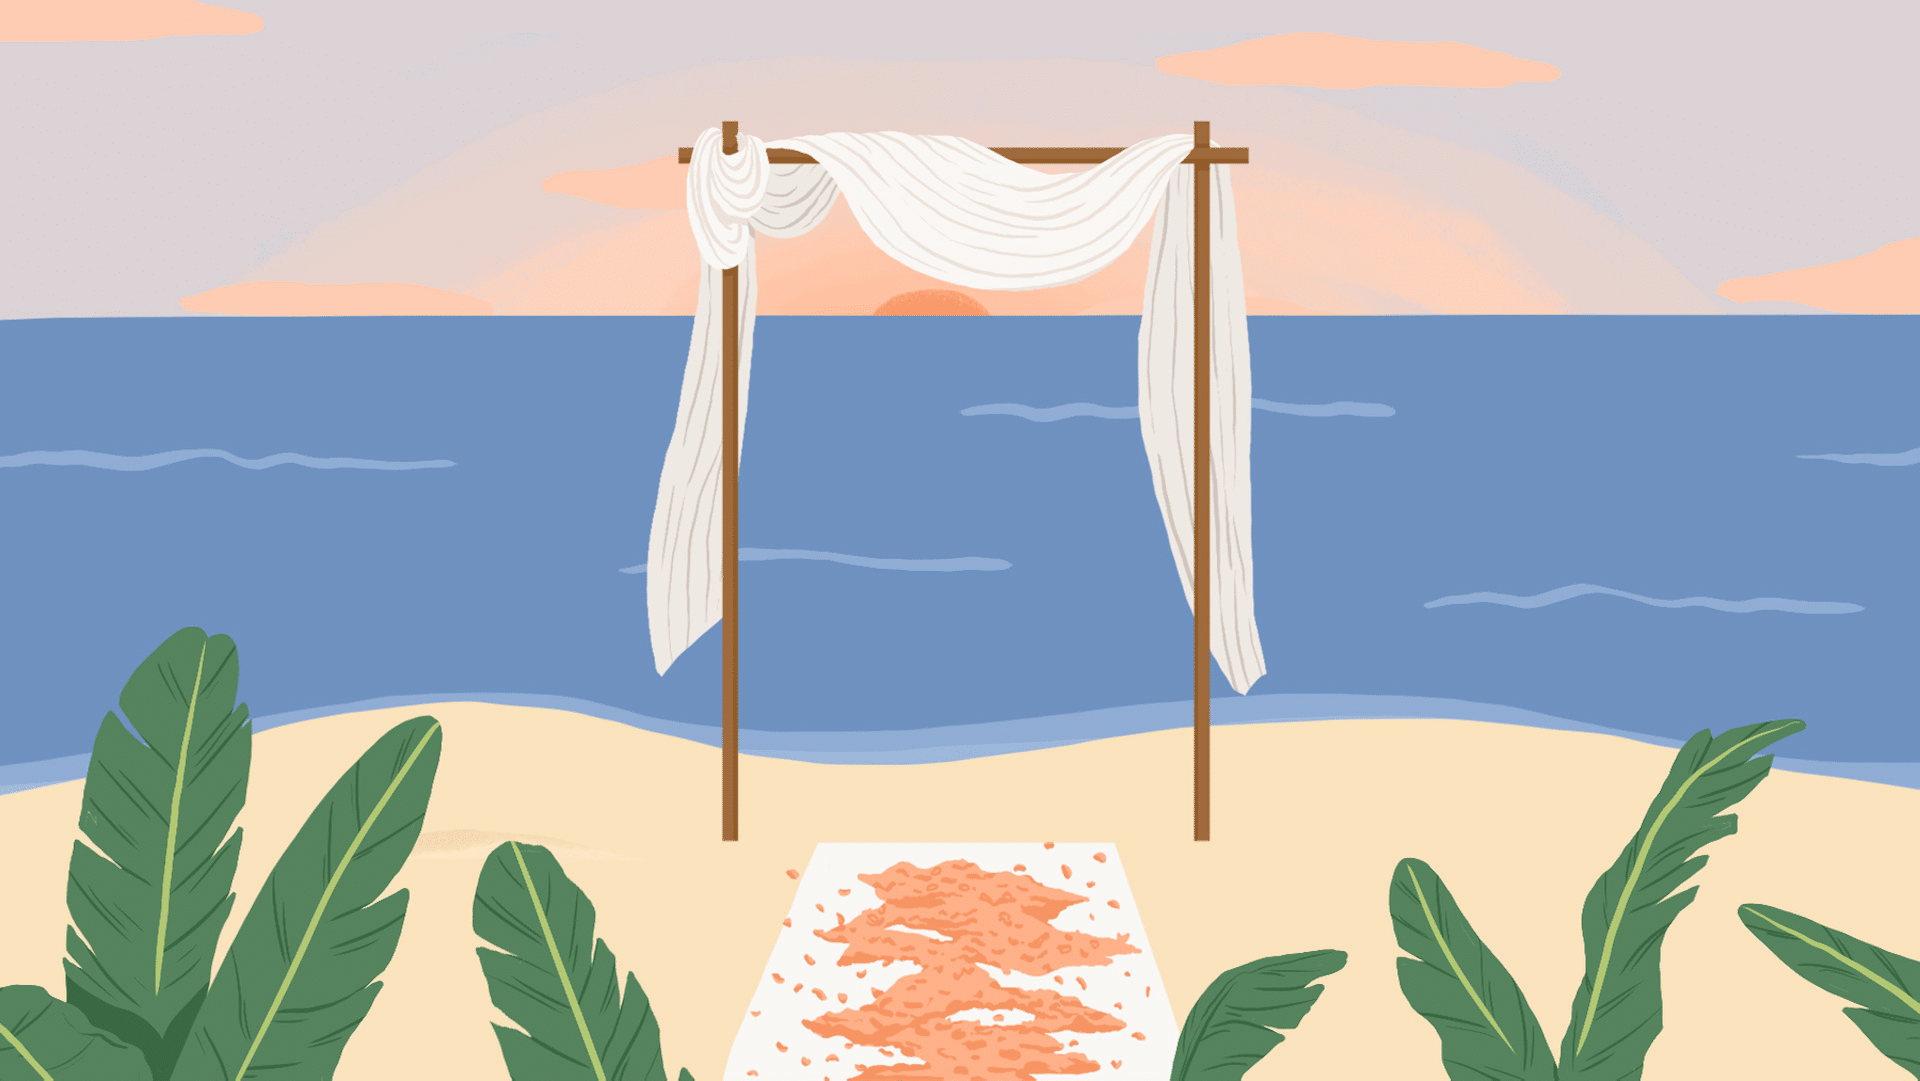 Illustration of a wedding canopy on the beach at sunset with palm leaves.